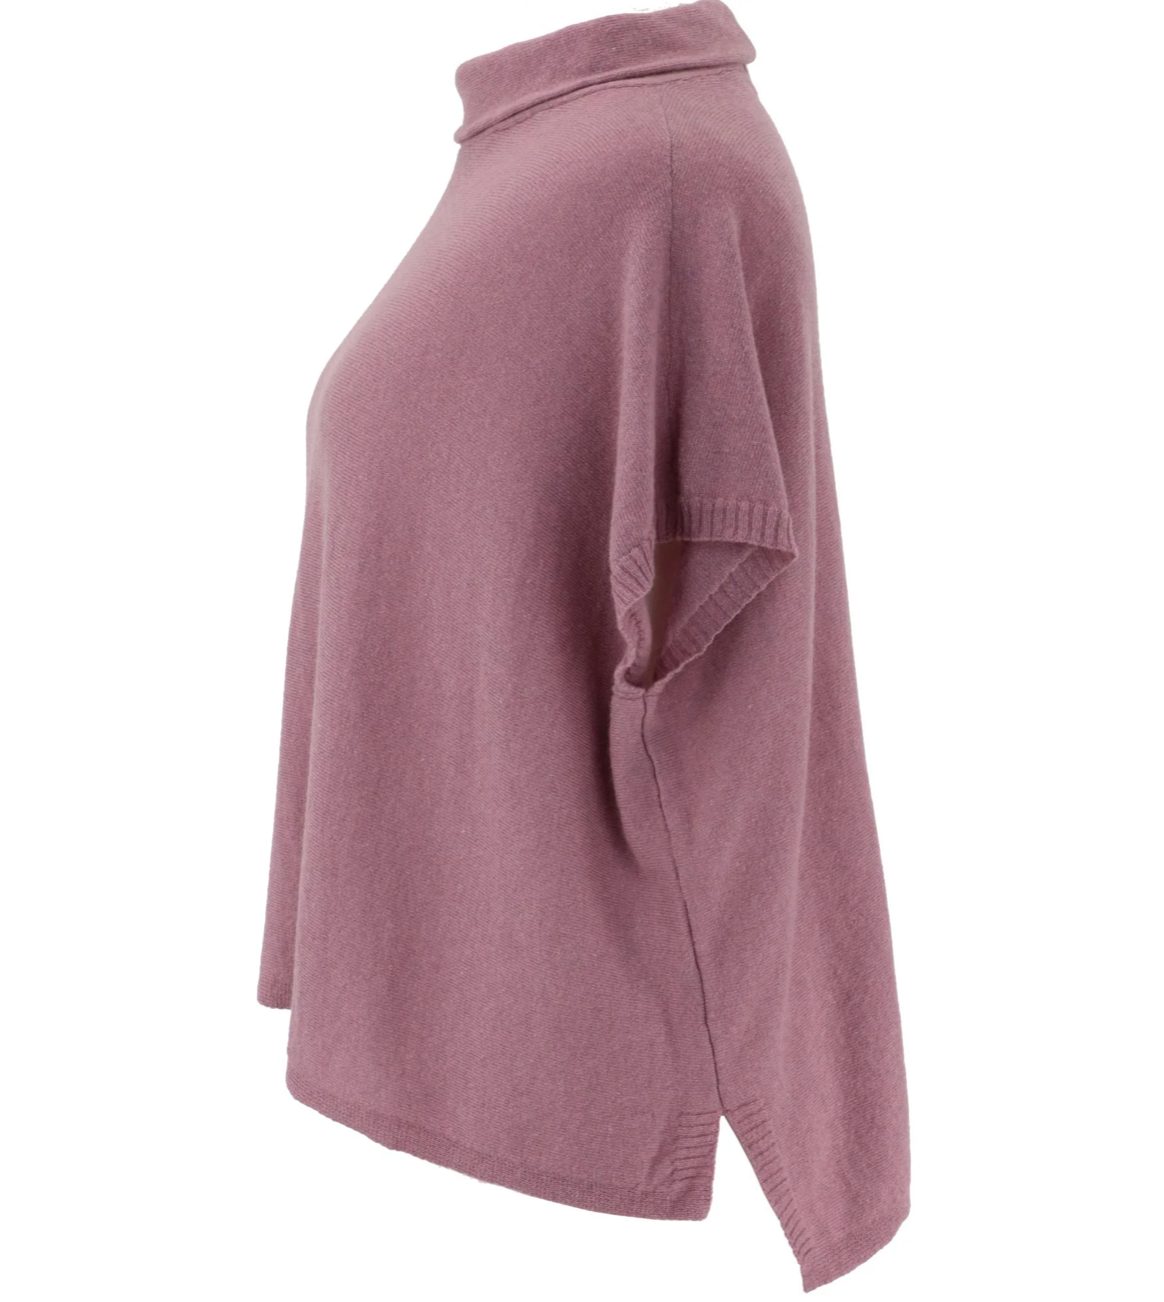 Cashmere Blend Tunic - Rose Pink